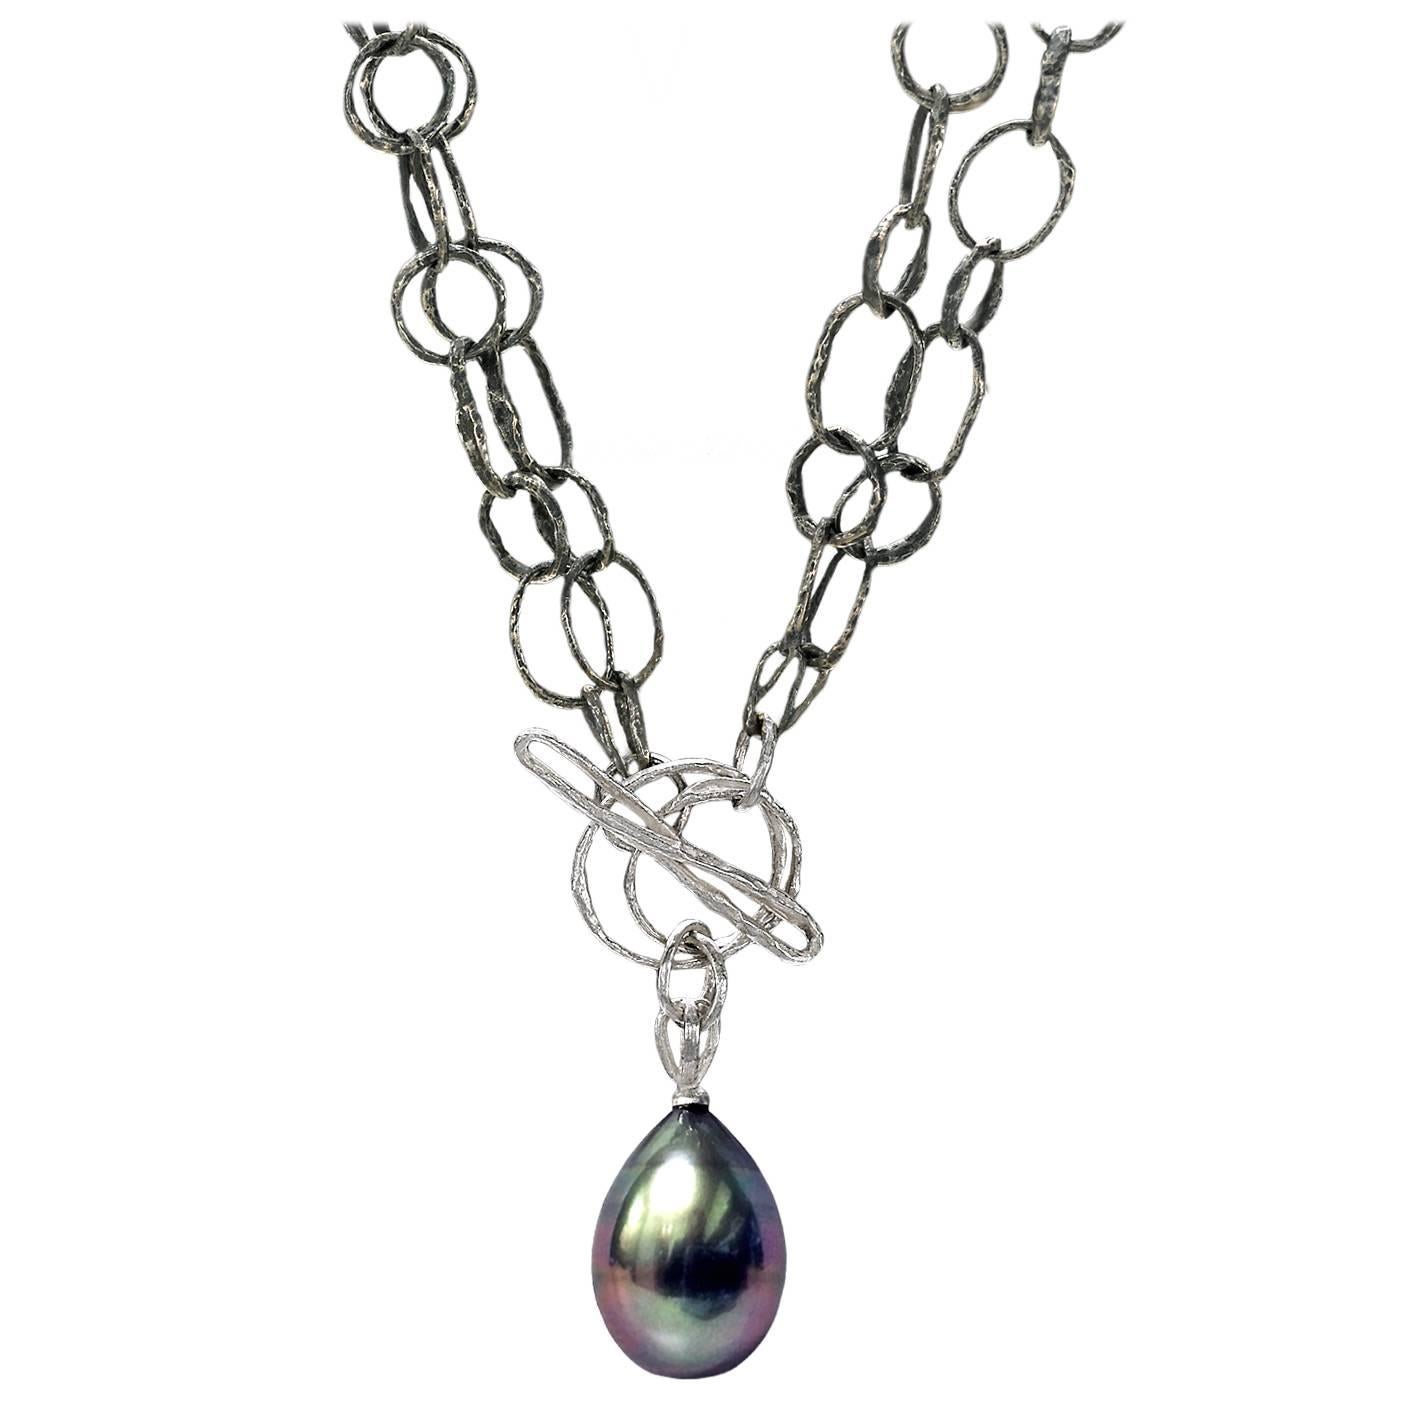 John Iversen One of a Kind Tahitian Pearl Silver Gold Double Link Necklace